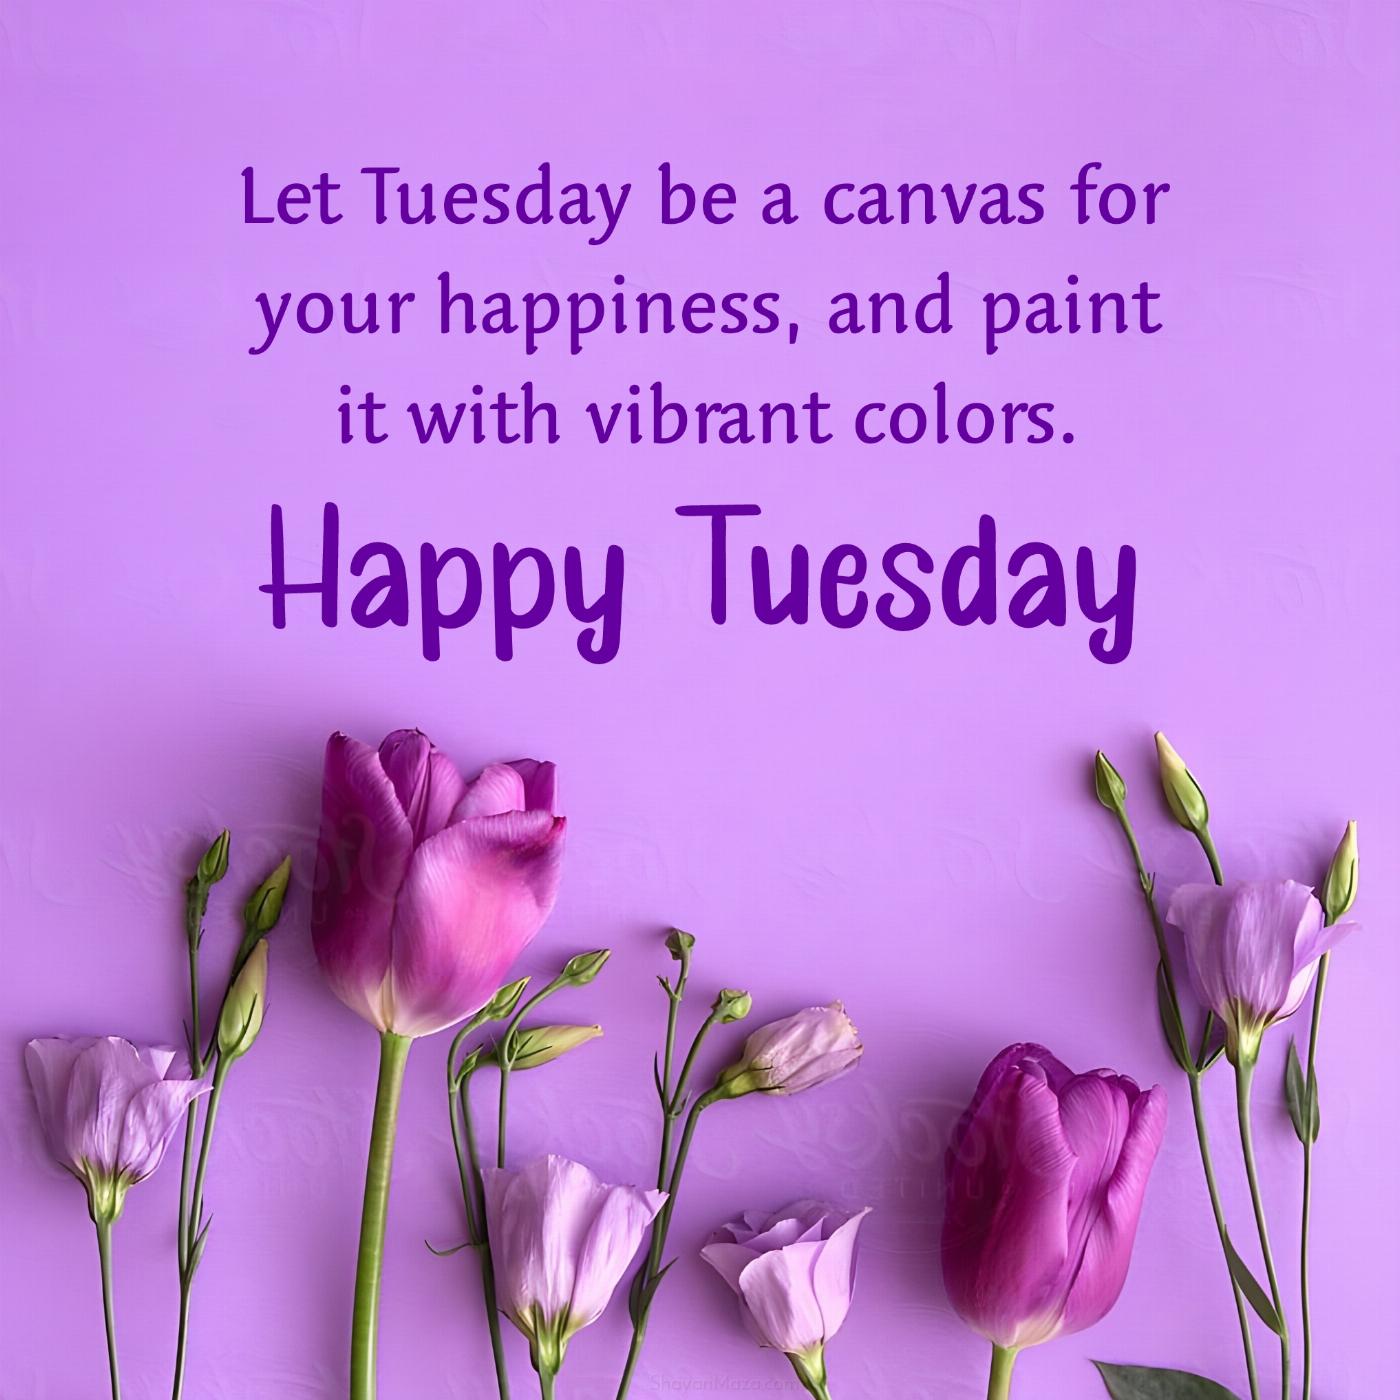 Let Tuesday be a canvas for your happiness and paint it